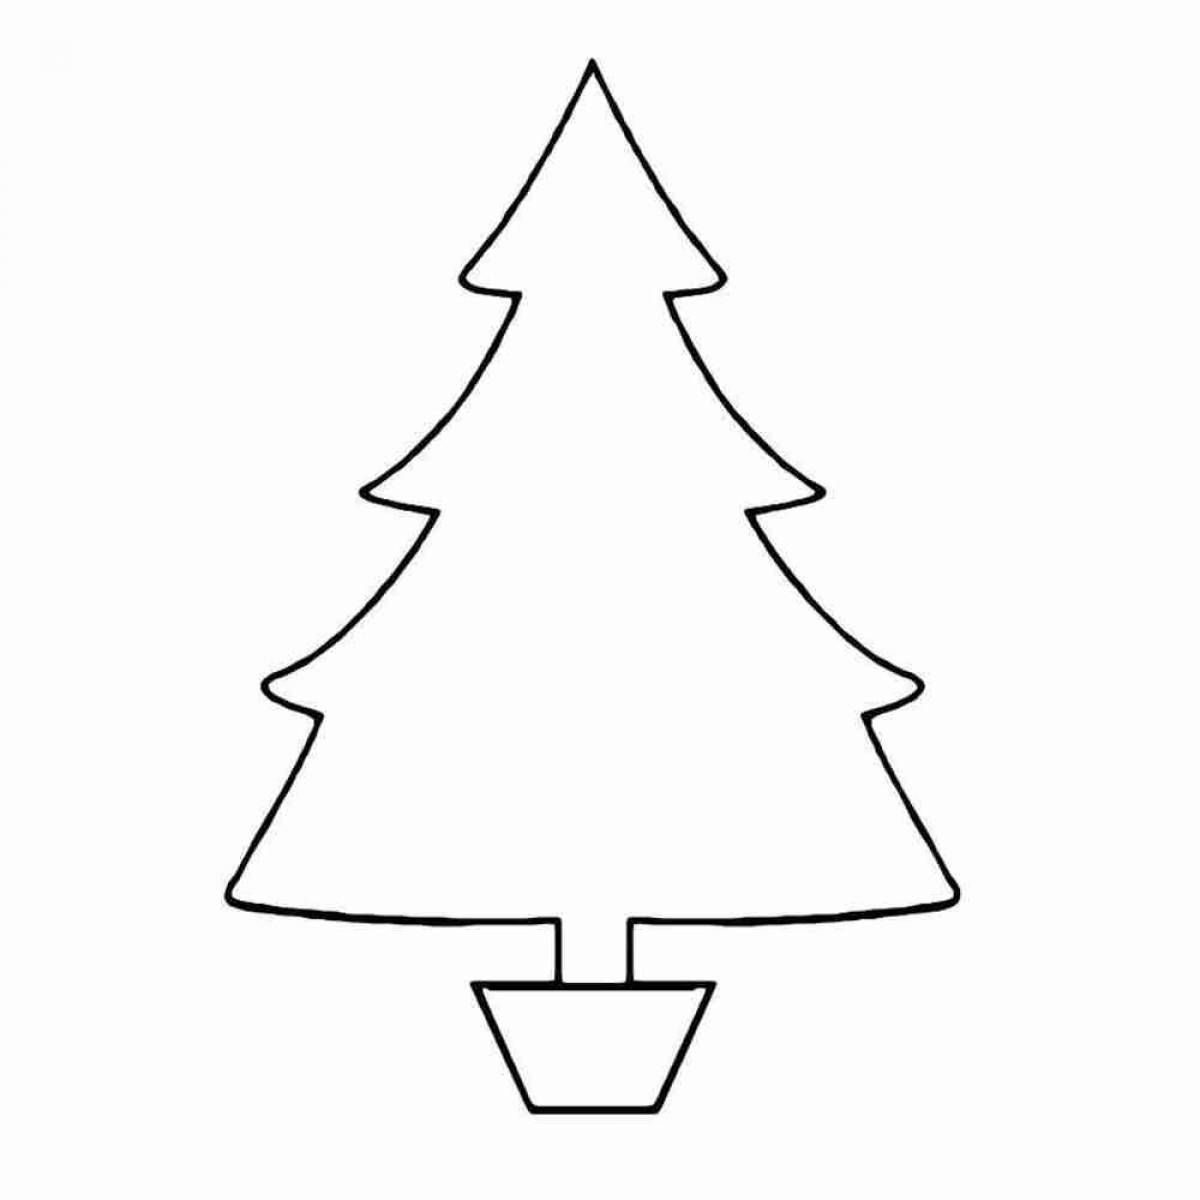 Outstanding christmas tree coloring page for 3-4 year olds